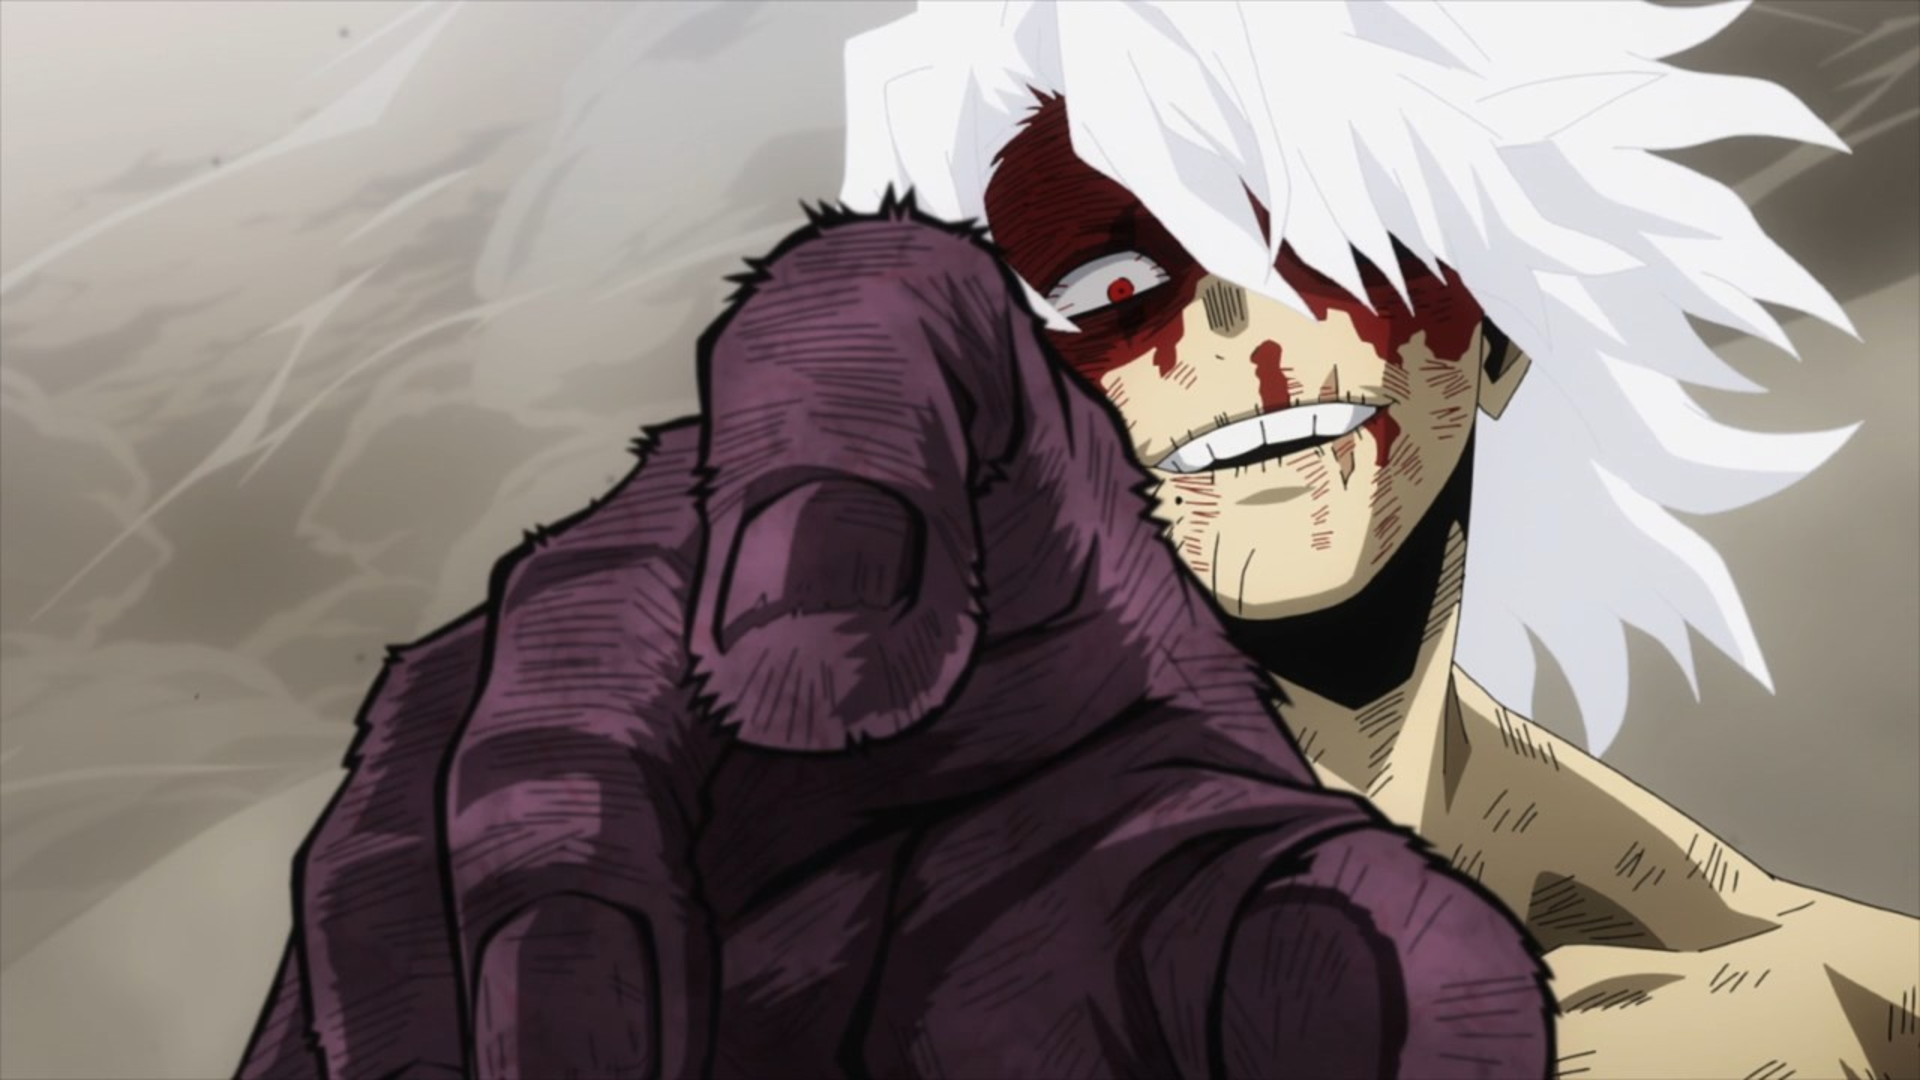 MHA: Shigaraki Stuns the Pro Heroes With His Strongest Abilities Yet